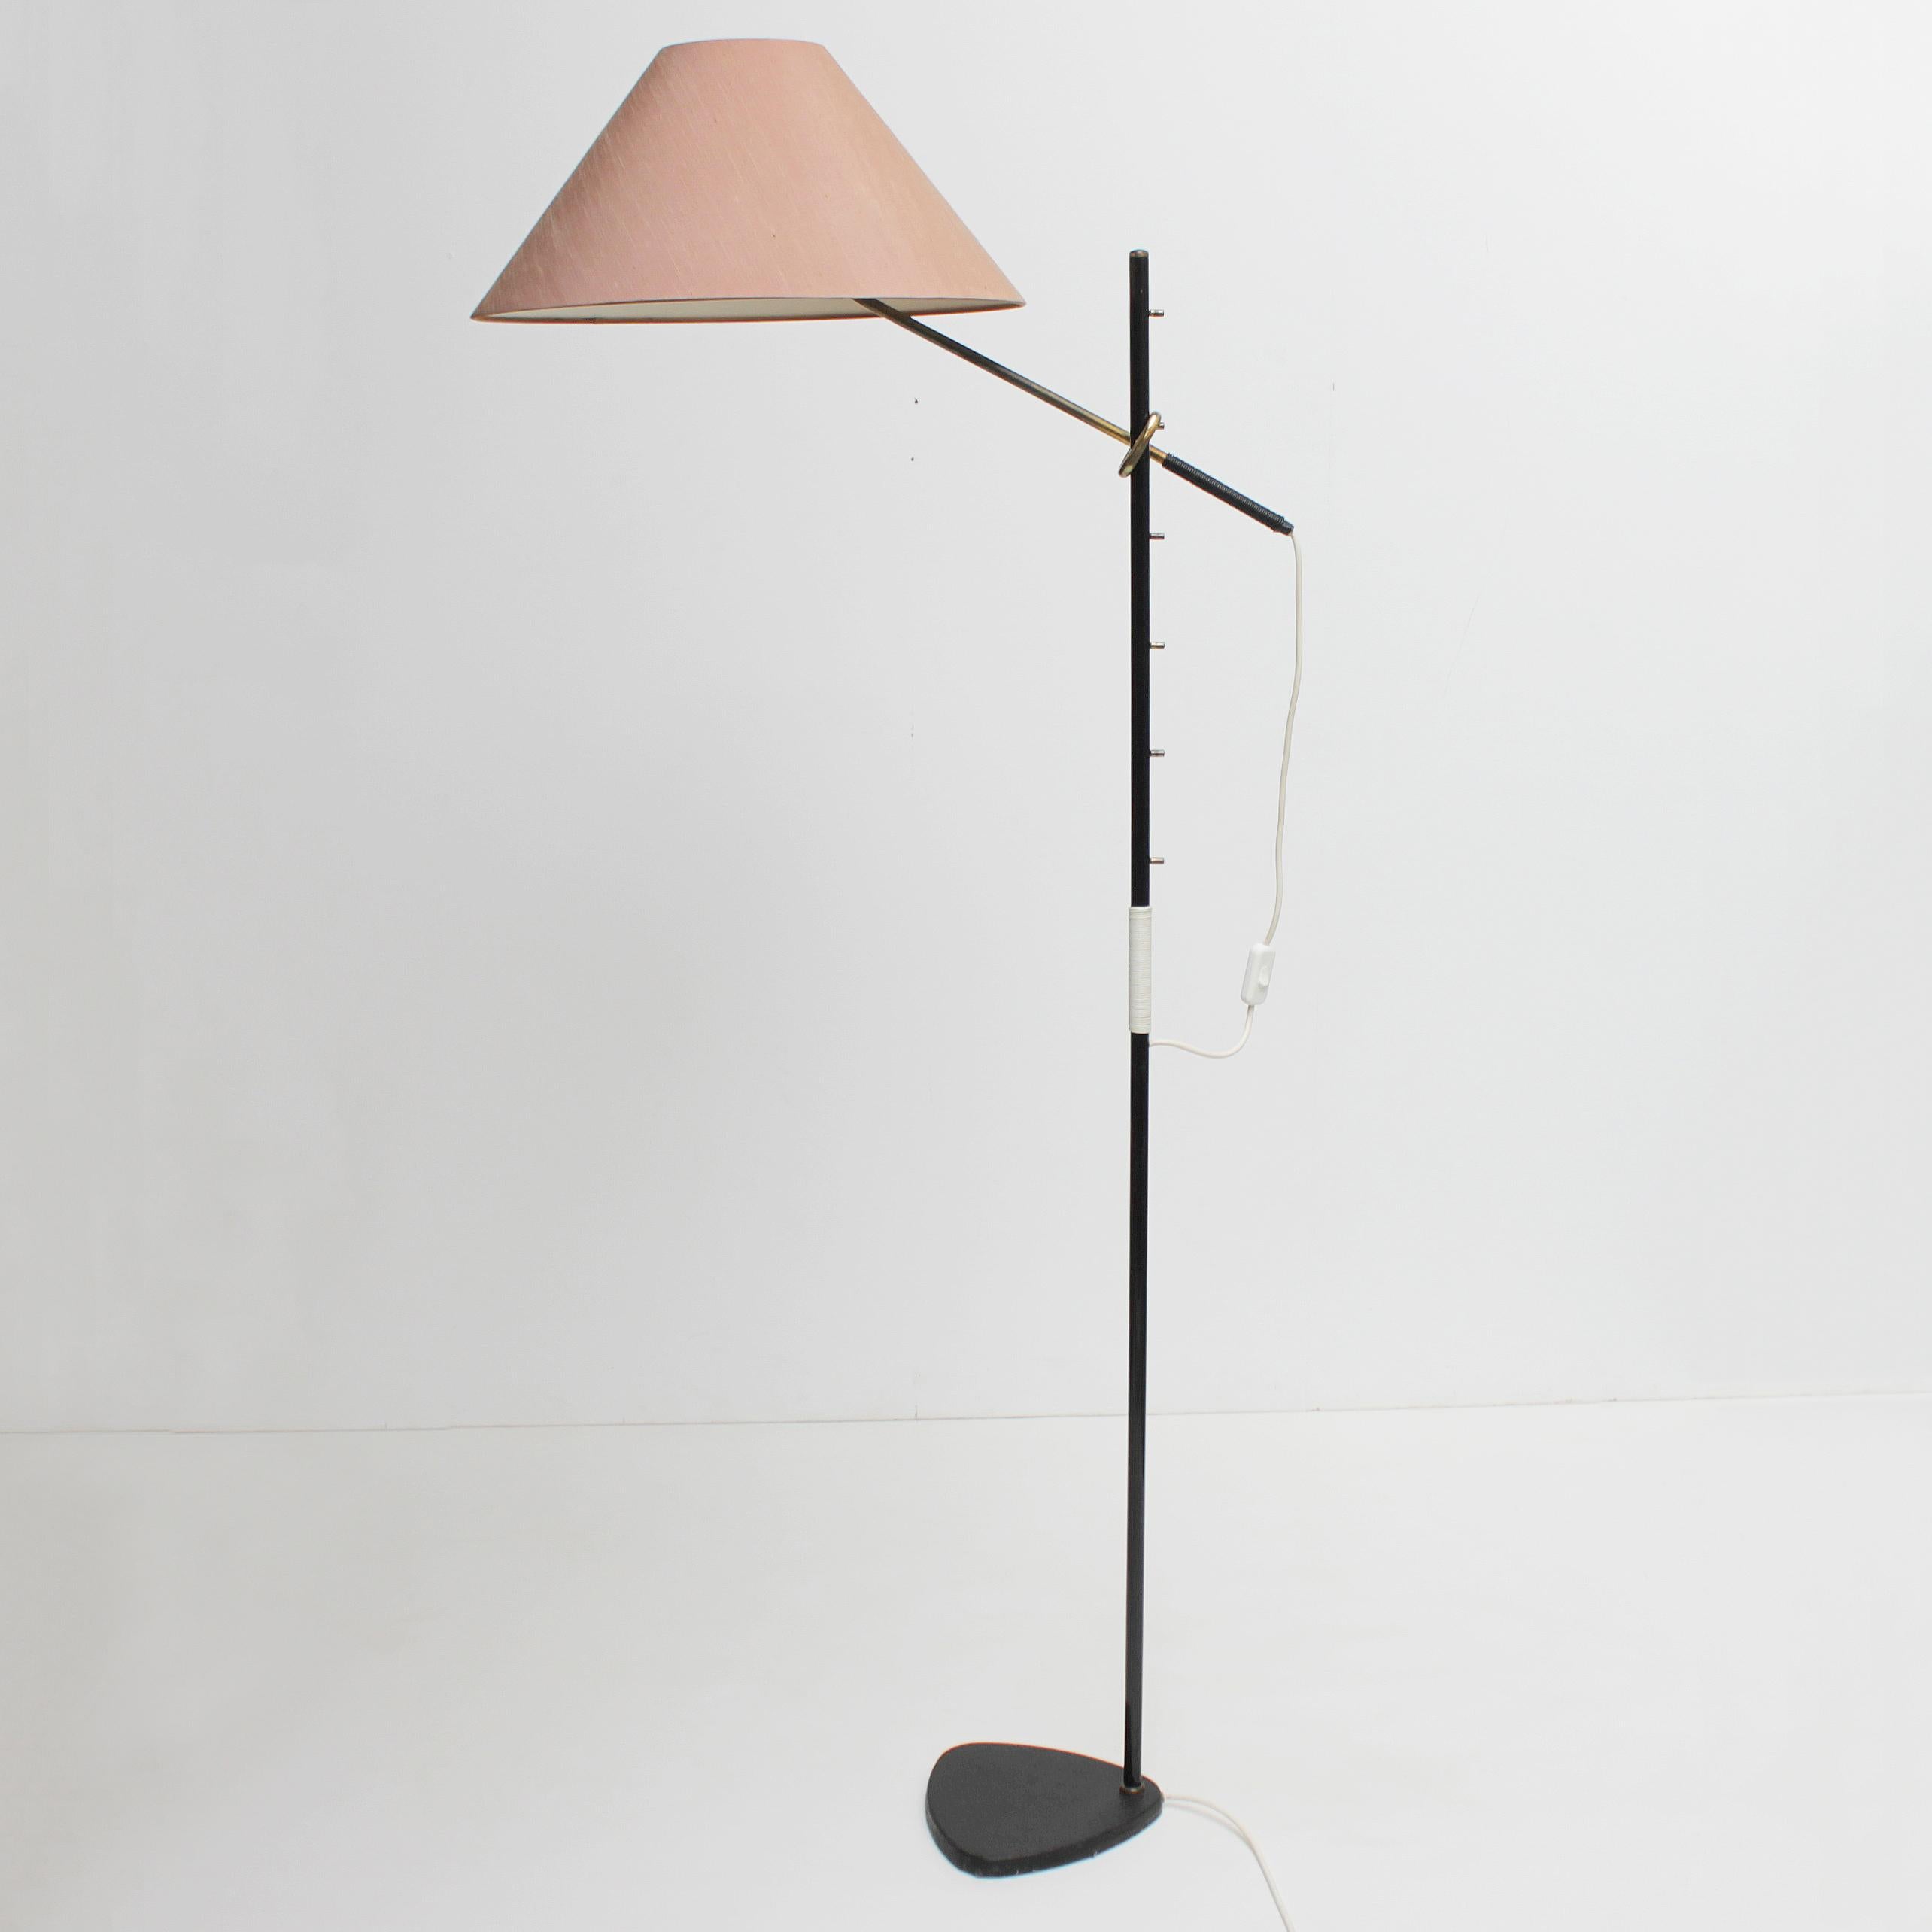 Floor lamp model 'Pelikan' No. 2097 by J.T. Kalmar, Vienna Austria.
Black lacquered cast base and stem with brass details. The taupe shade on the brass arm is adjustable in six positions. Wear consistent with age and use, minor scratches and lost